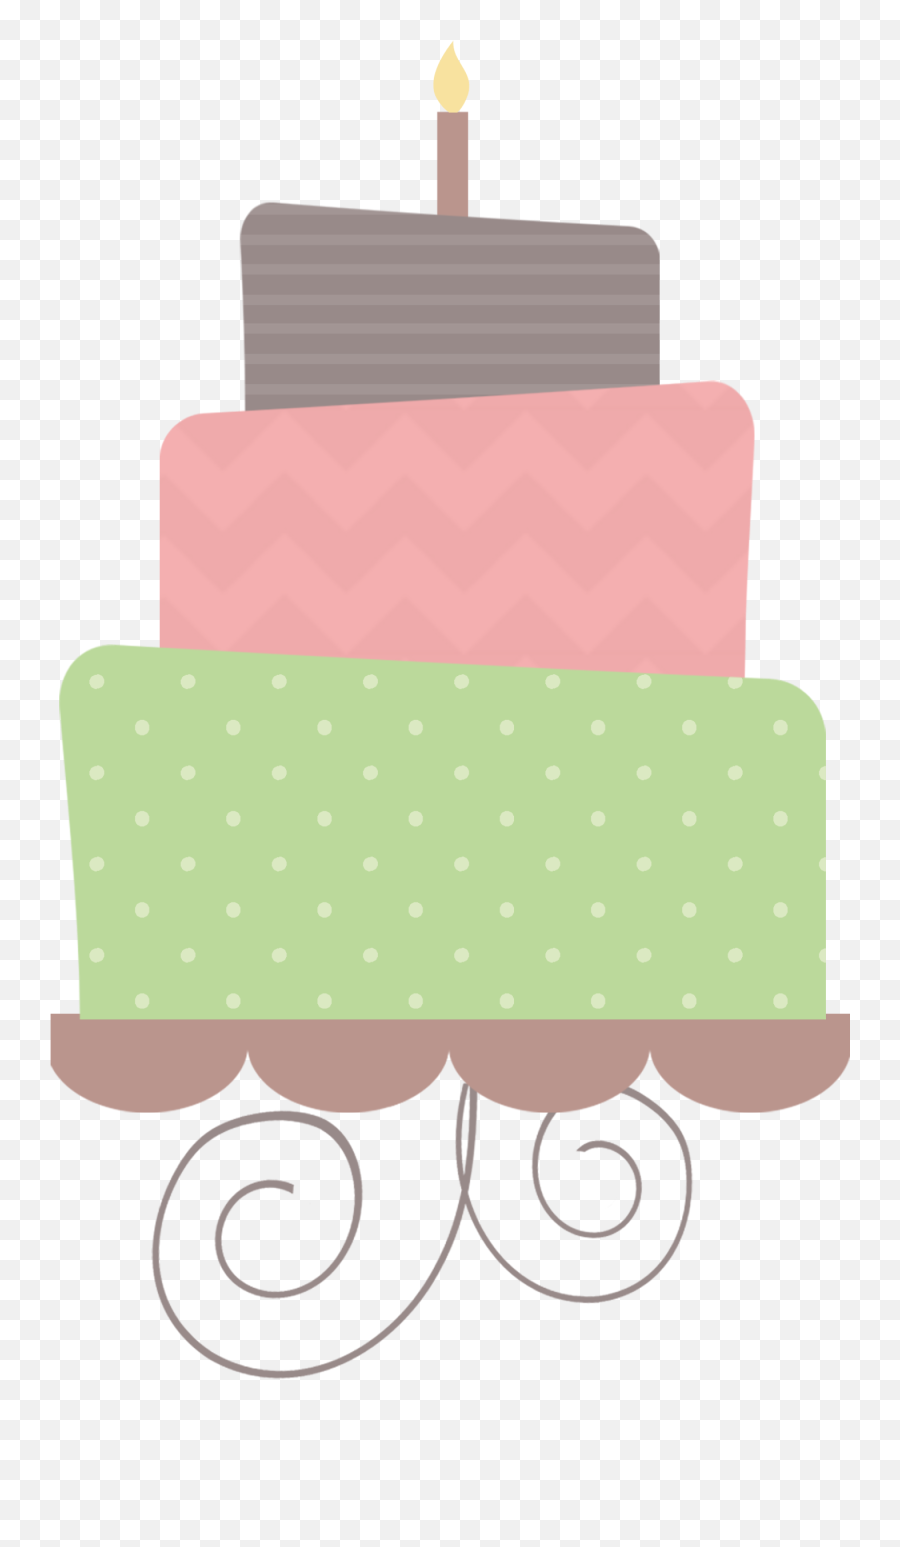 Download For Free Cake Png In High Resolution 26286 - Free Birthday Cake,Cake Png Transparent